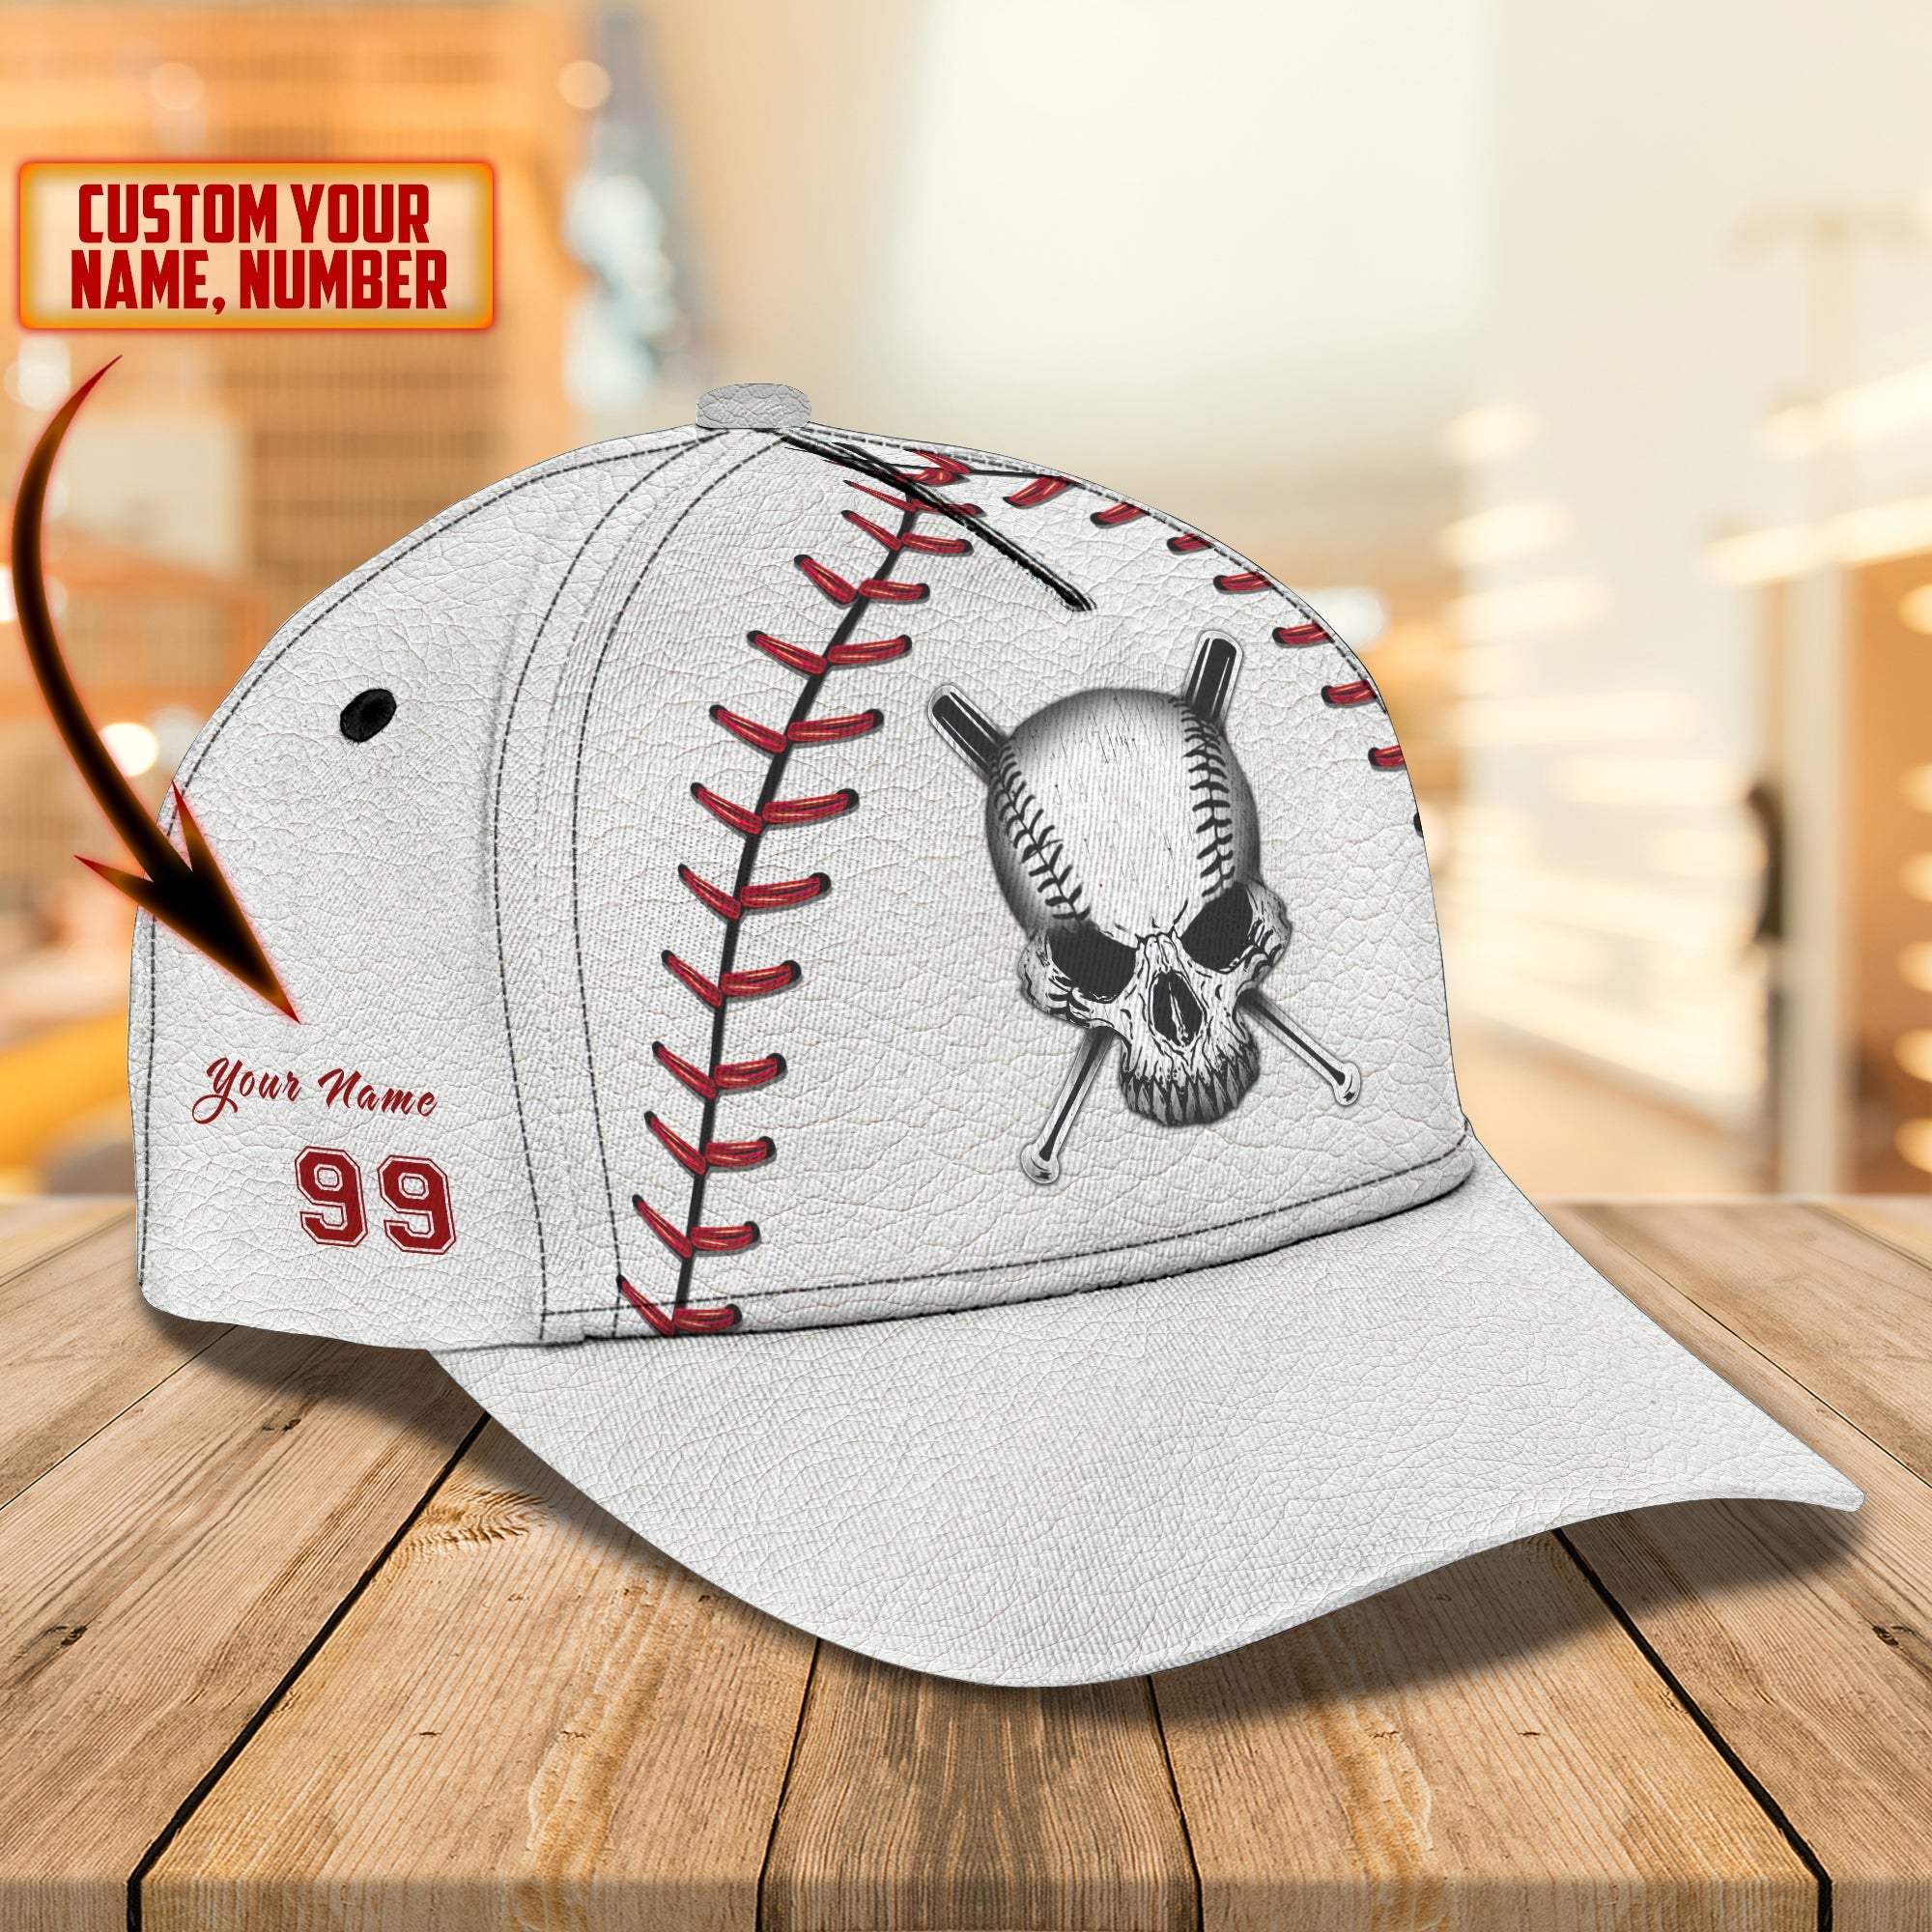 Baseball Player - Personalized Name Number Cap For Baseball Lover